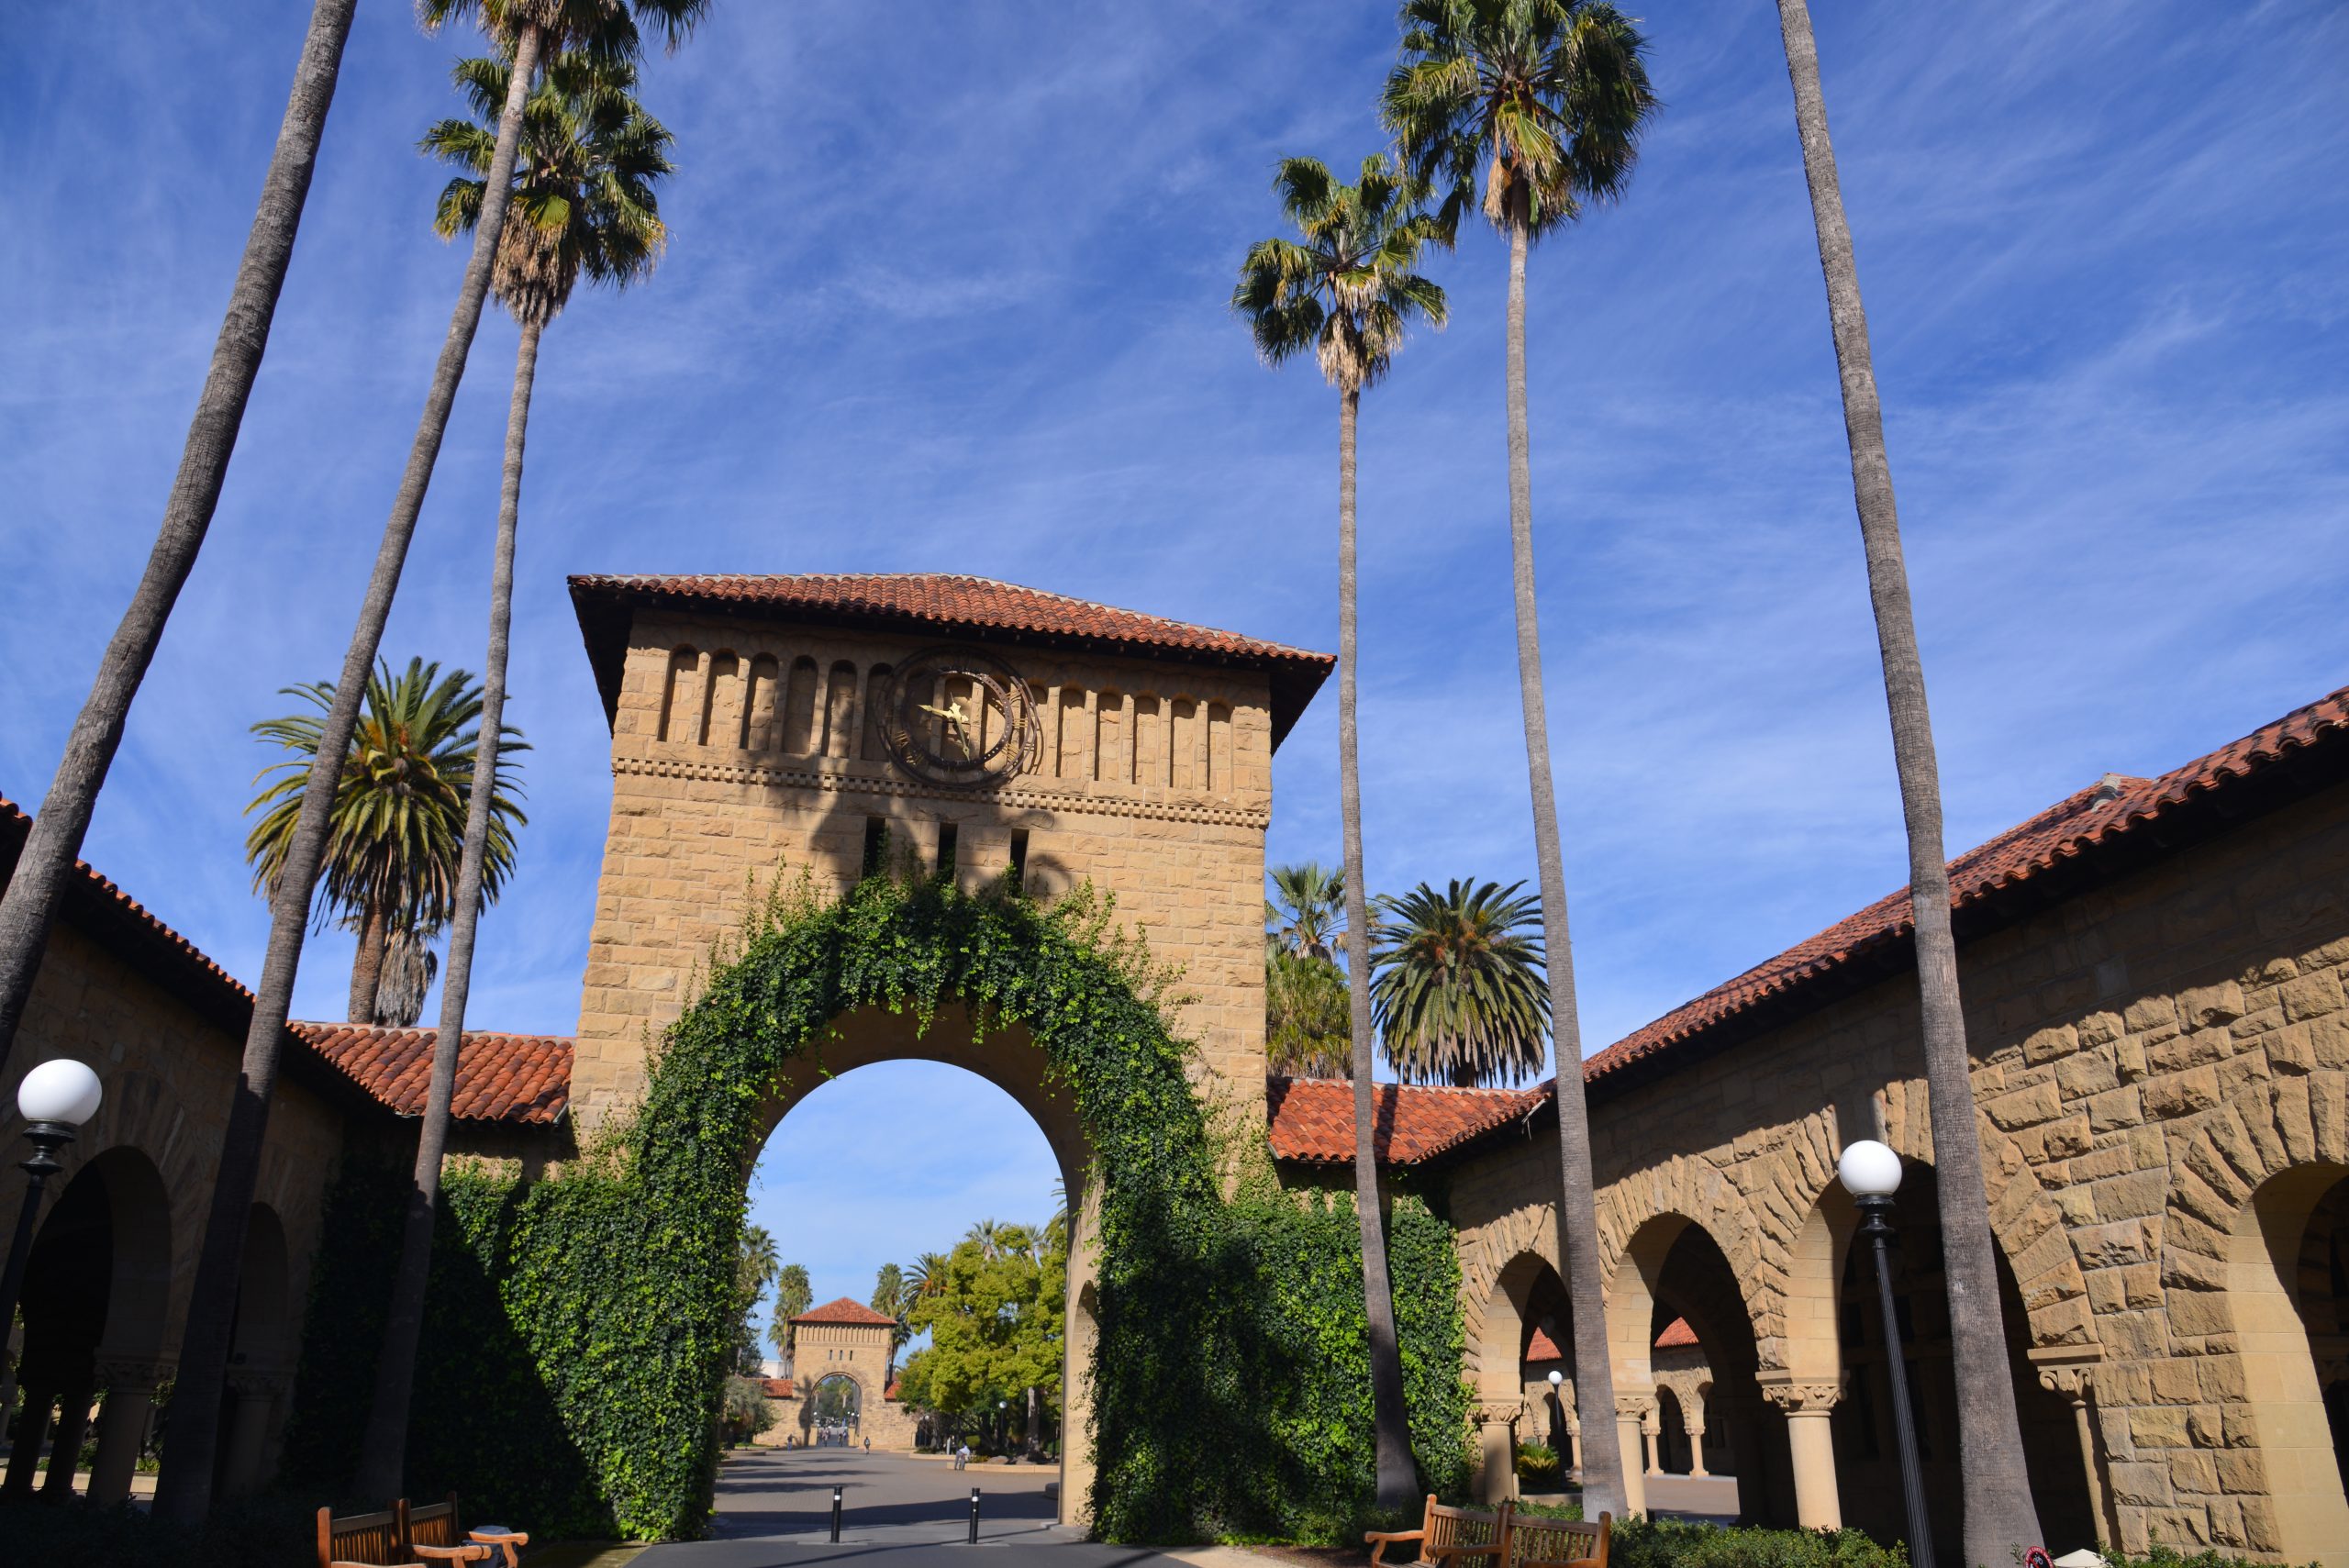 What Stanford Admissions Looks for in a Prospective Student